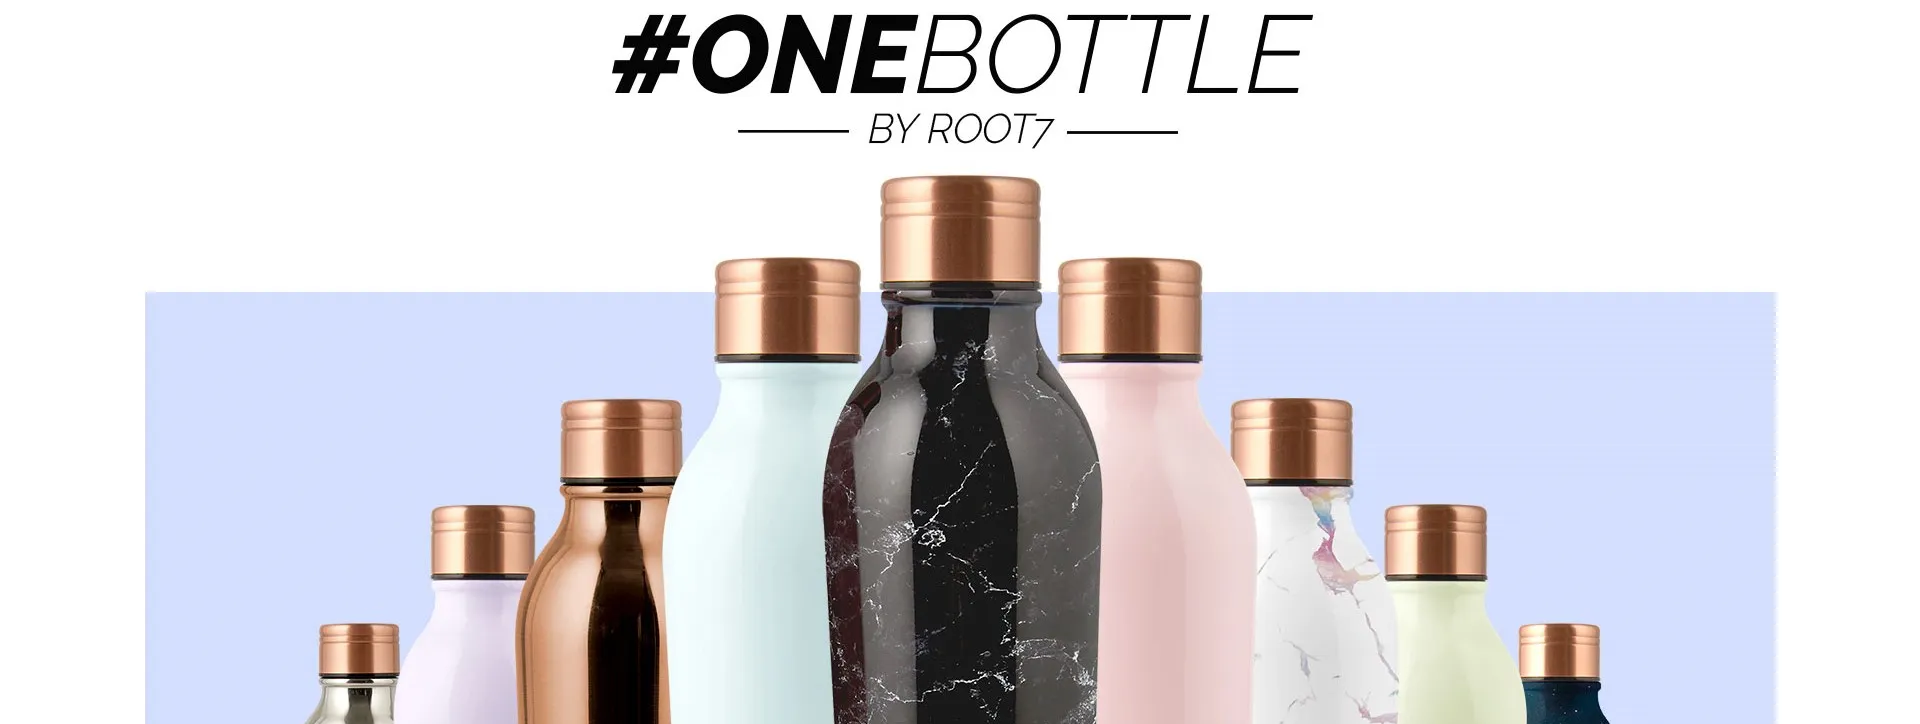 Root7 One Bottle